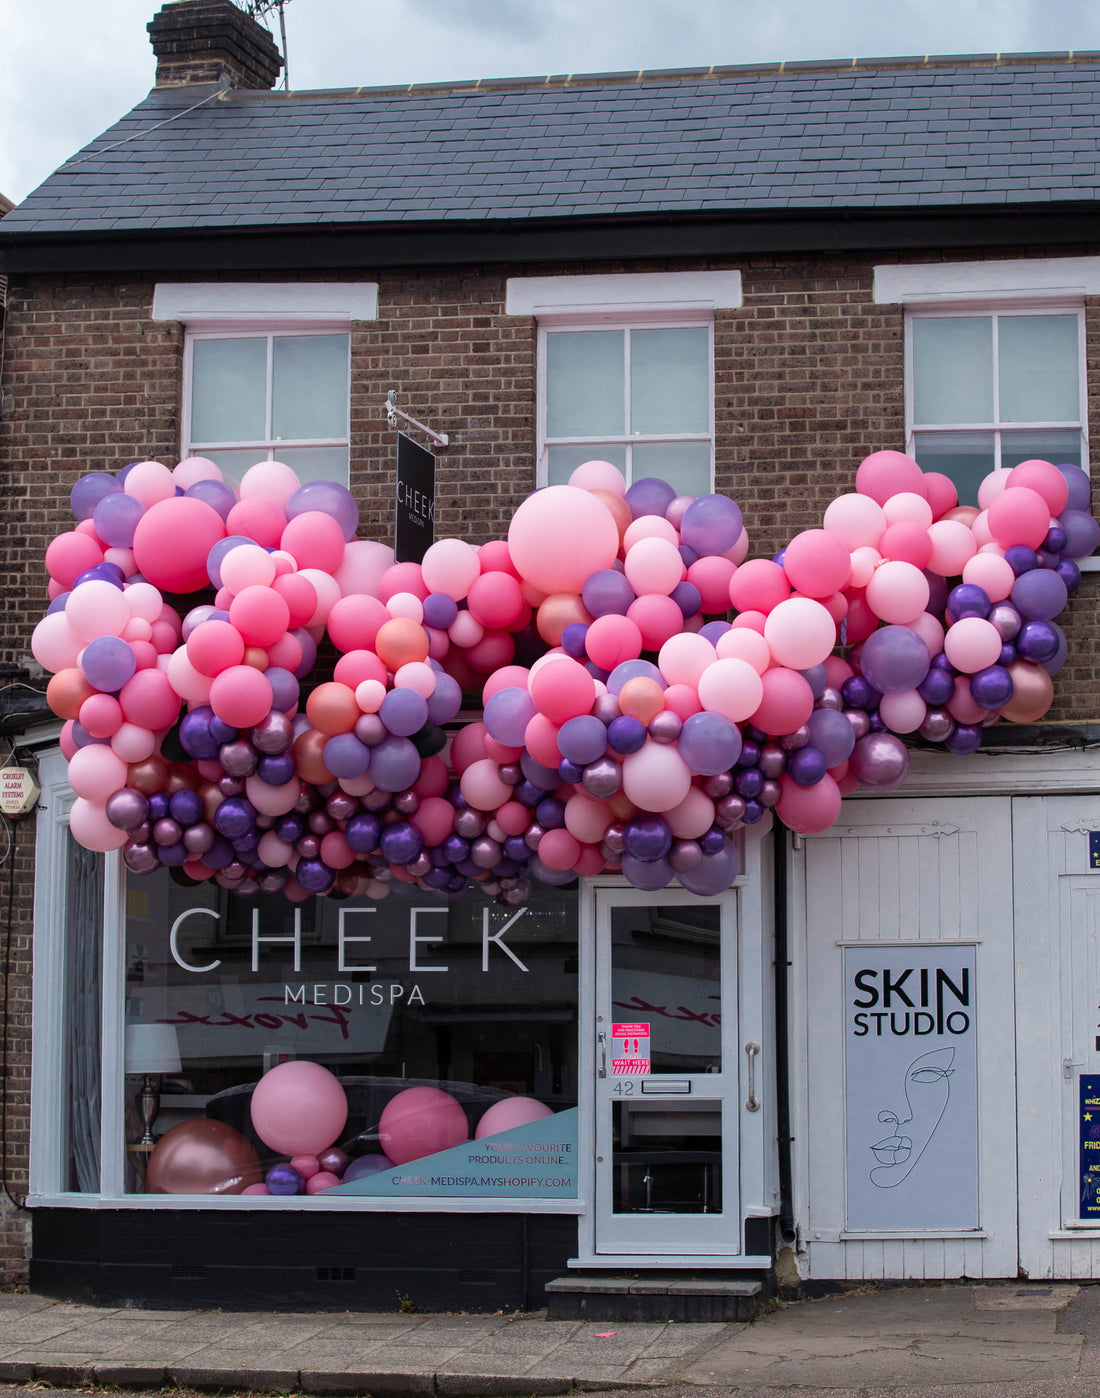 9 Unusual things You Can Make with Balloons